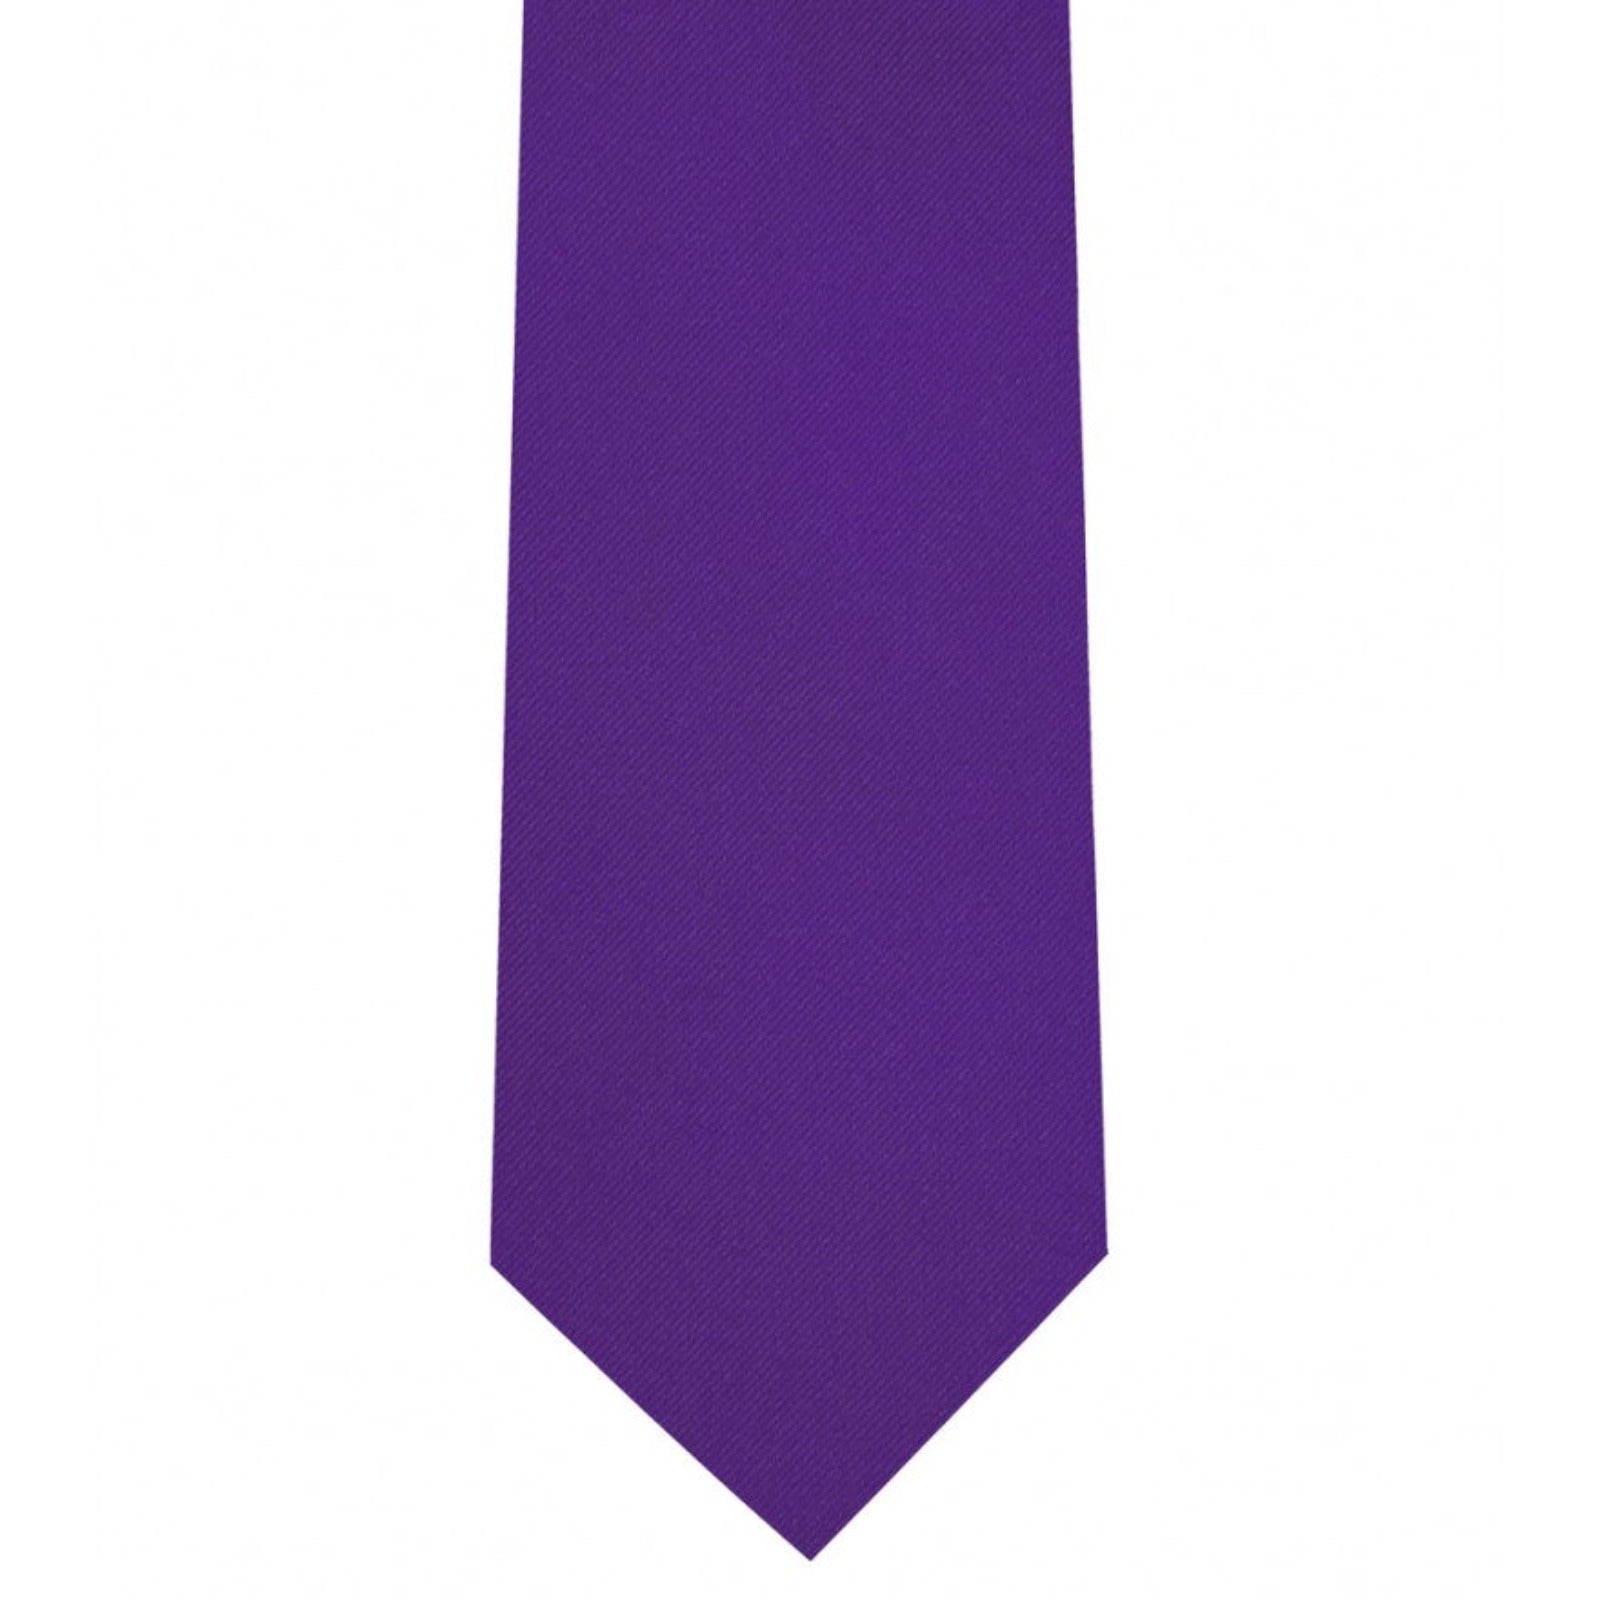 Classic Medium Purple Tie Ultra Skinny tie width 2.25 inches With Matching Pocket Square | KCT Menswear